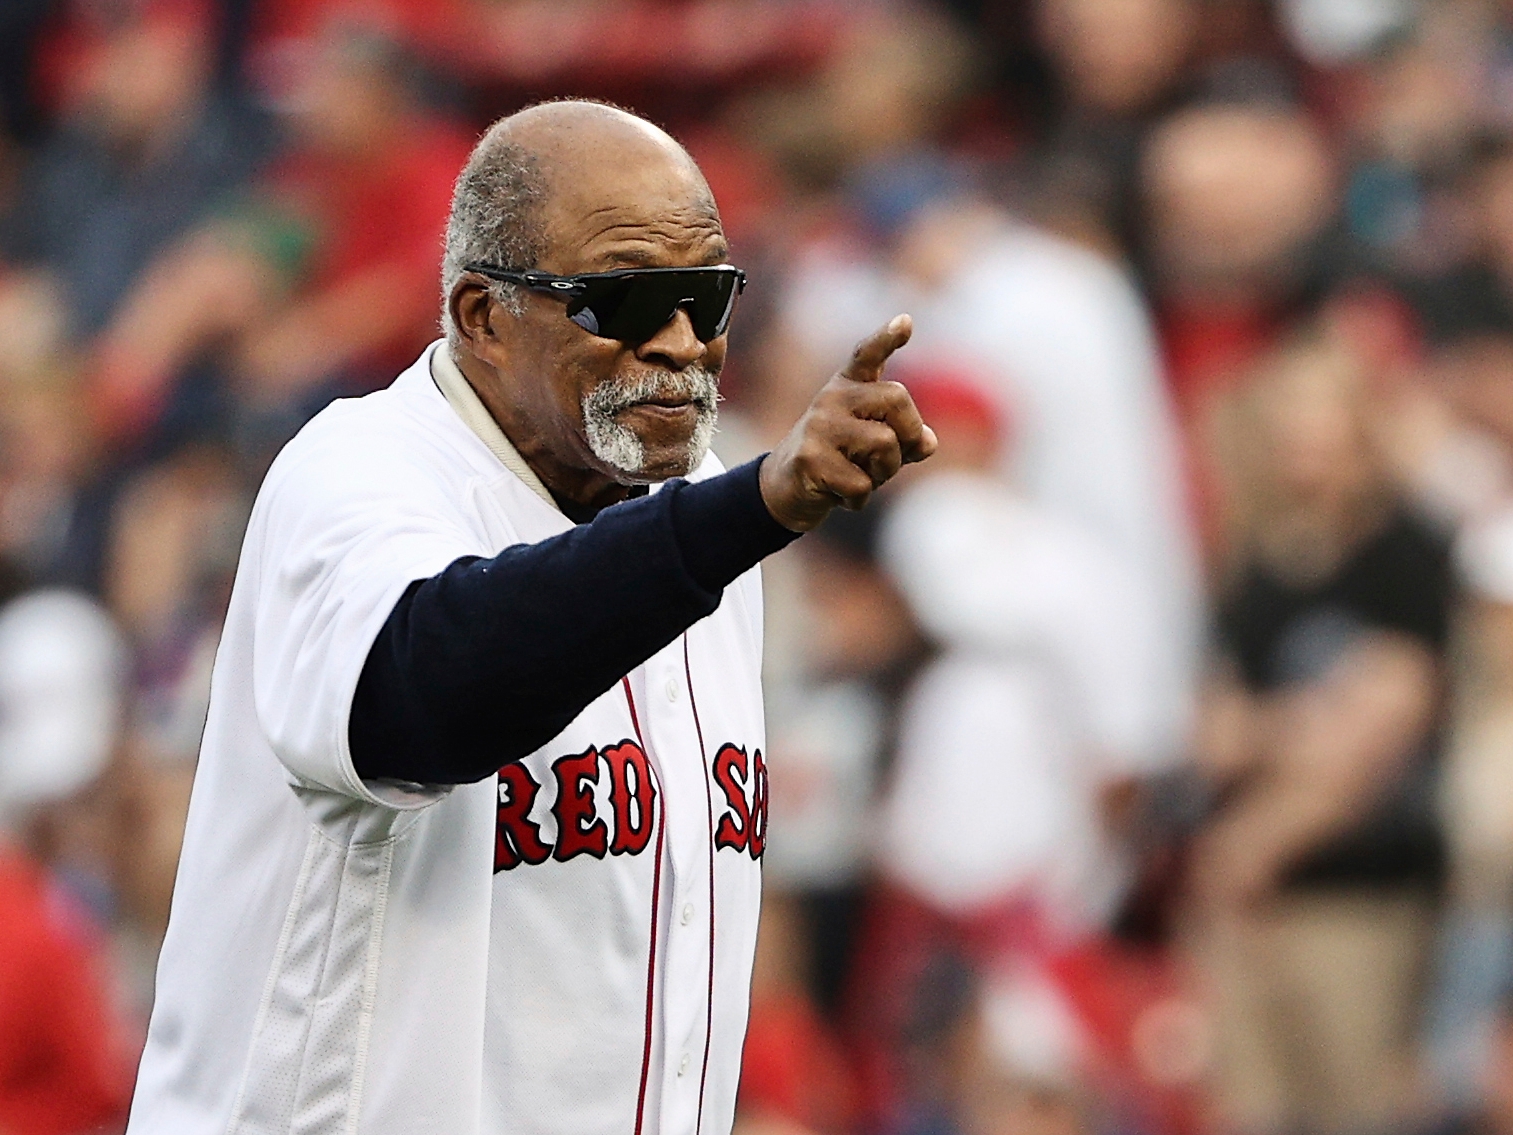 Red Sox Hall of Famer Luis Tiant is seen with a 2013 World Series  championship ring during spring training Wednesday, Feb. 25, 2015 at  JetBlue Park in Fort Myers, Fla. The Boston